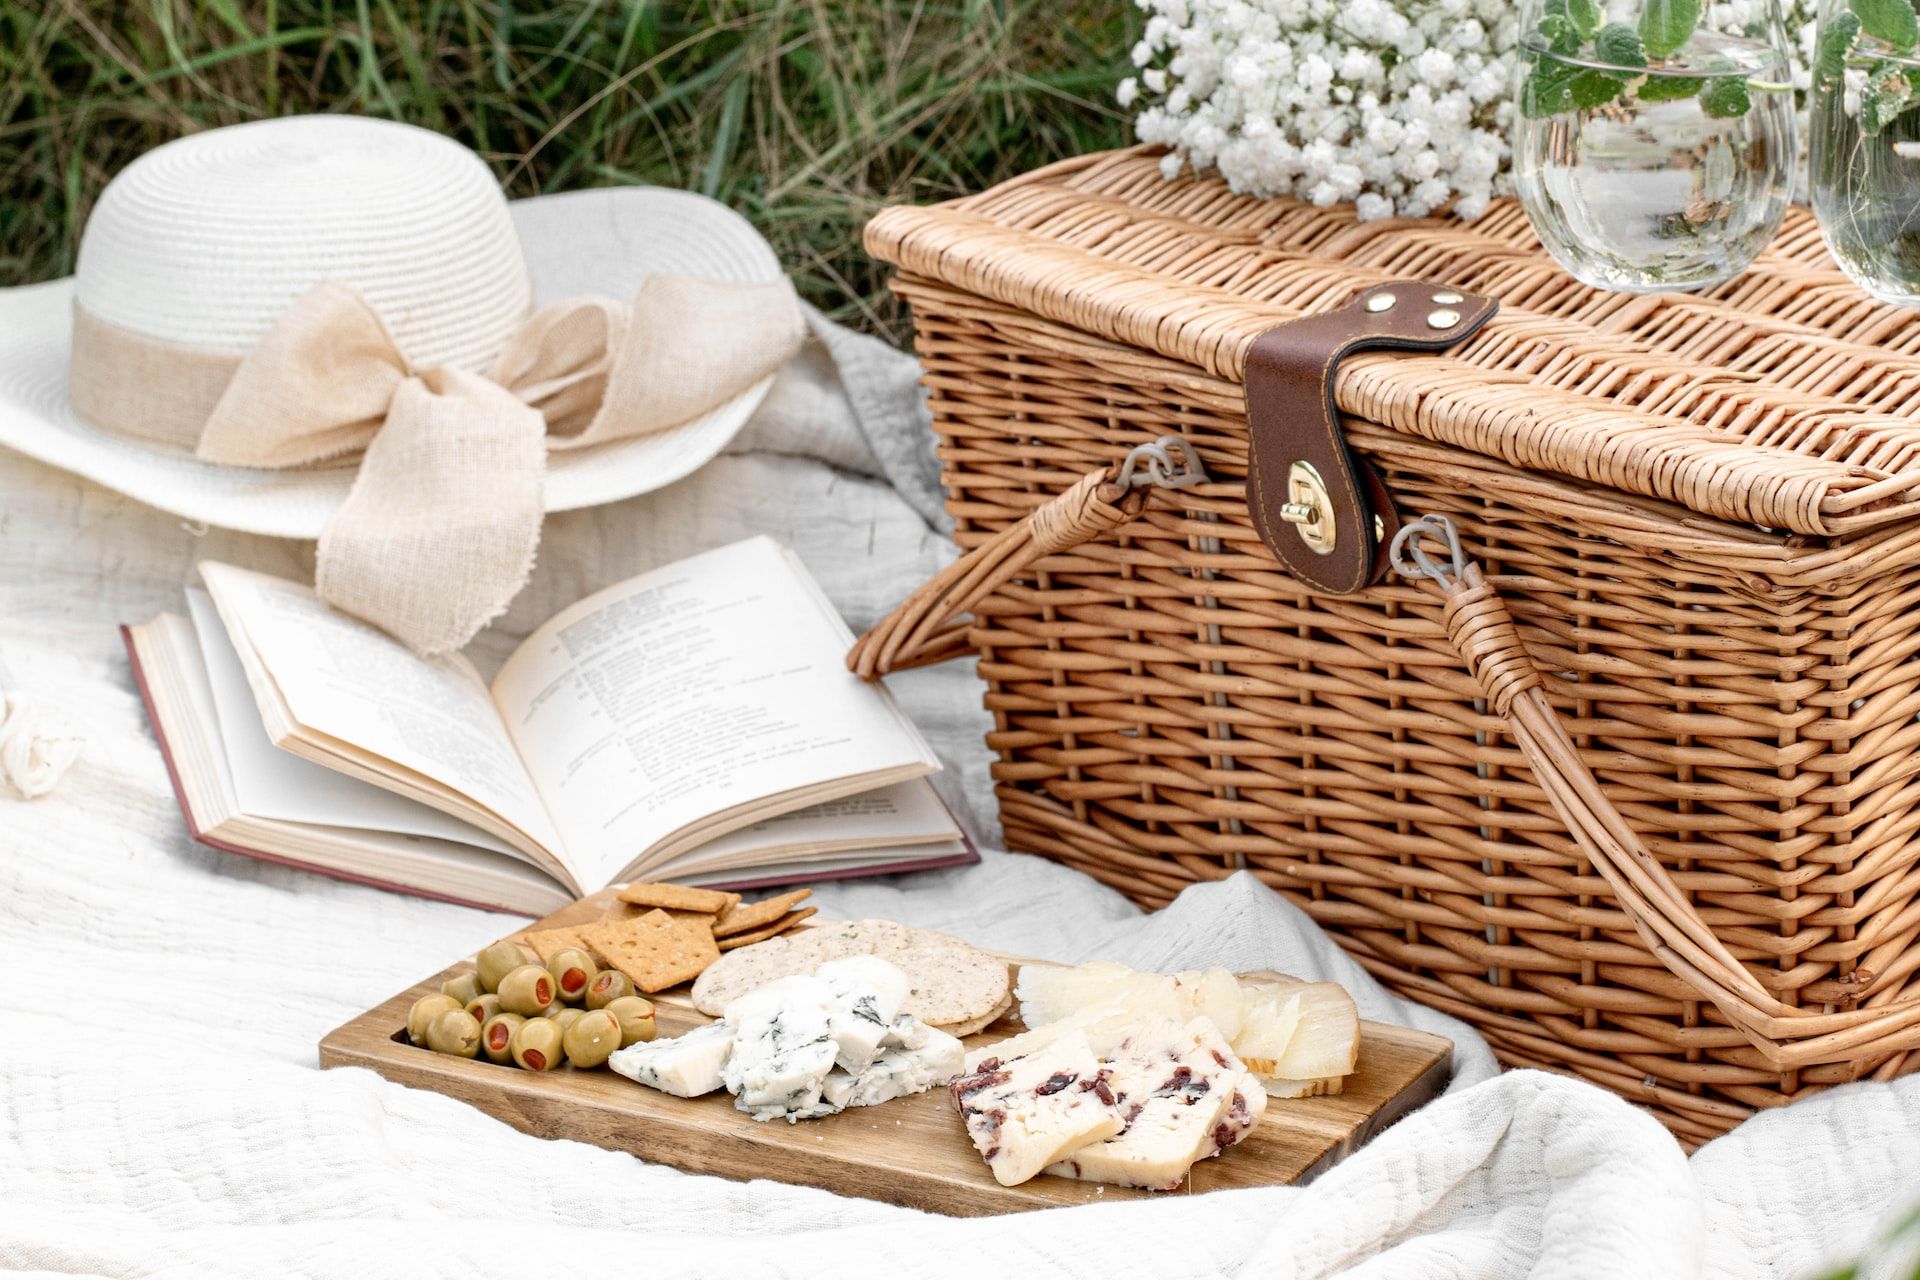 Picnic basket, white hat, and a book in a field during spring time